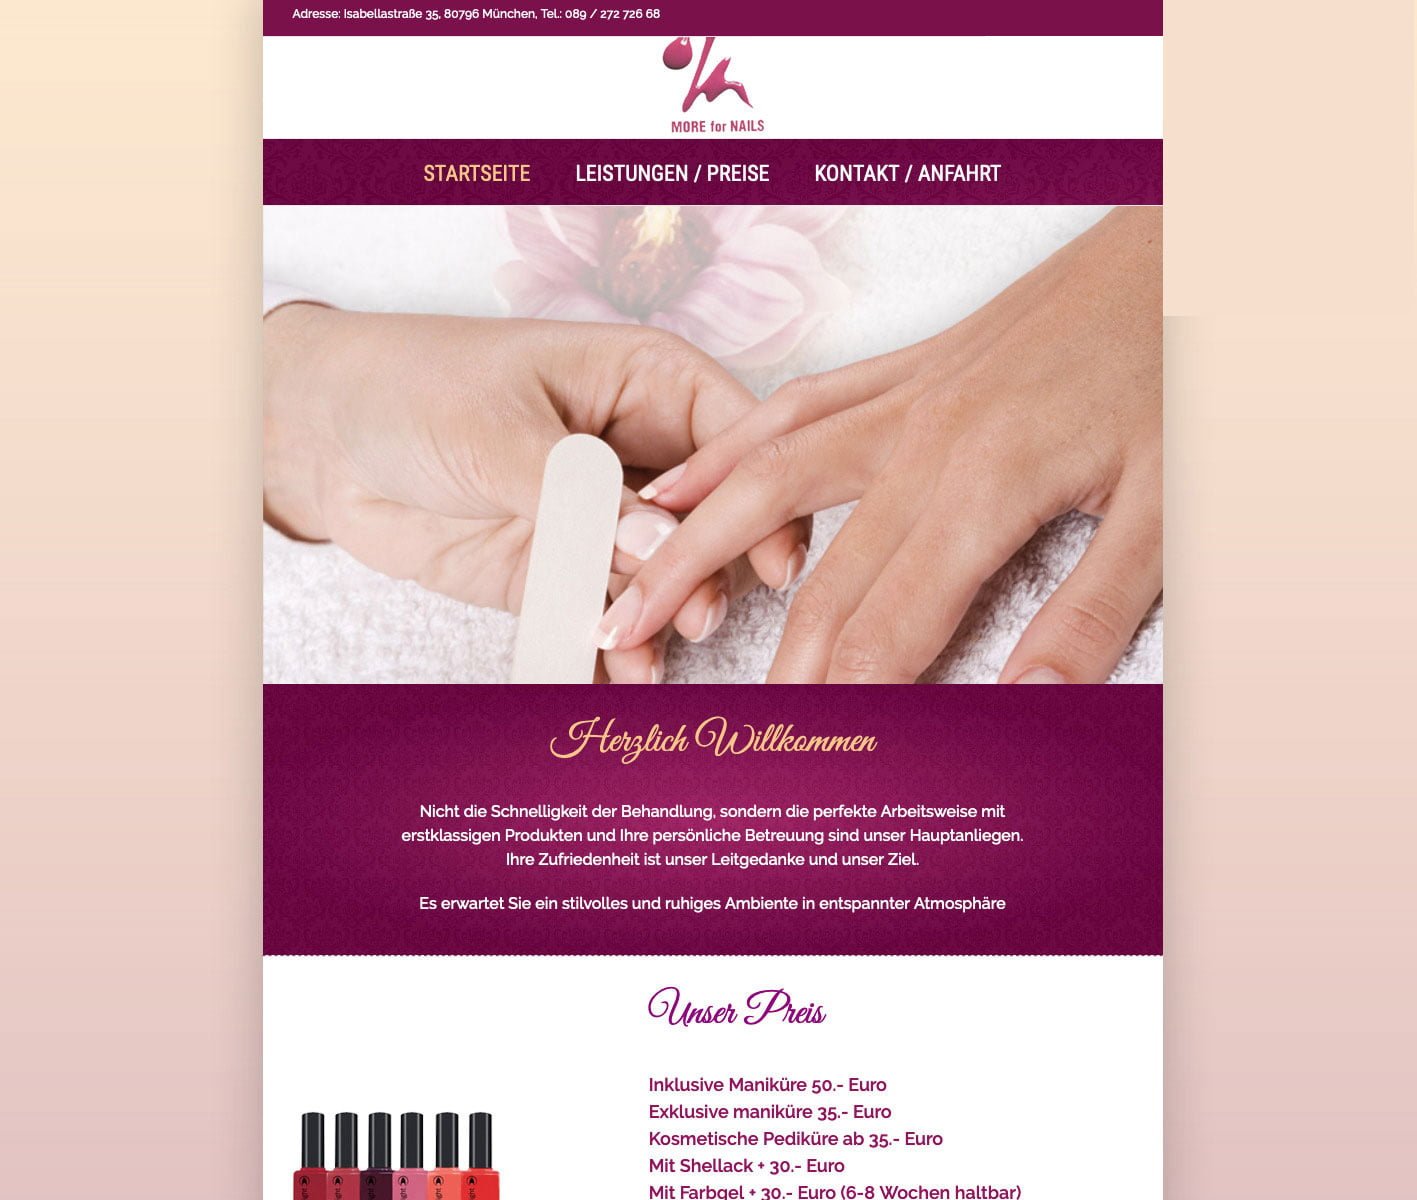 webdesign more for nails preview